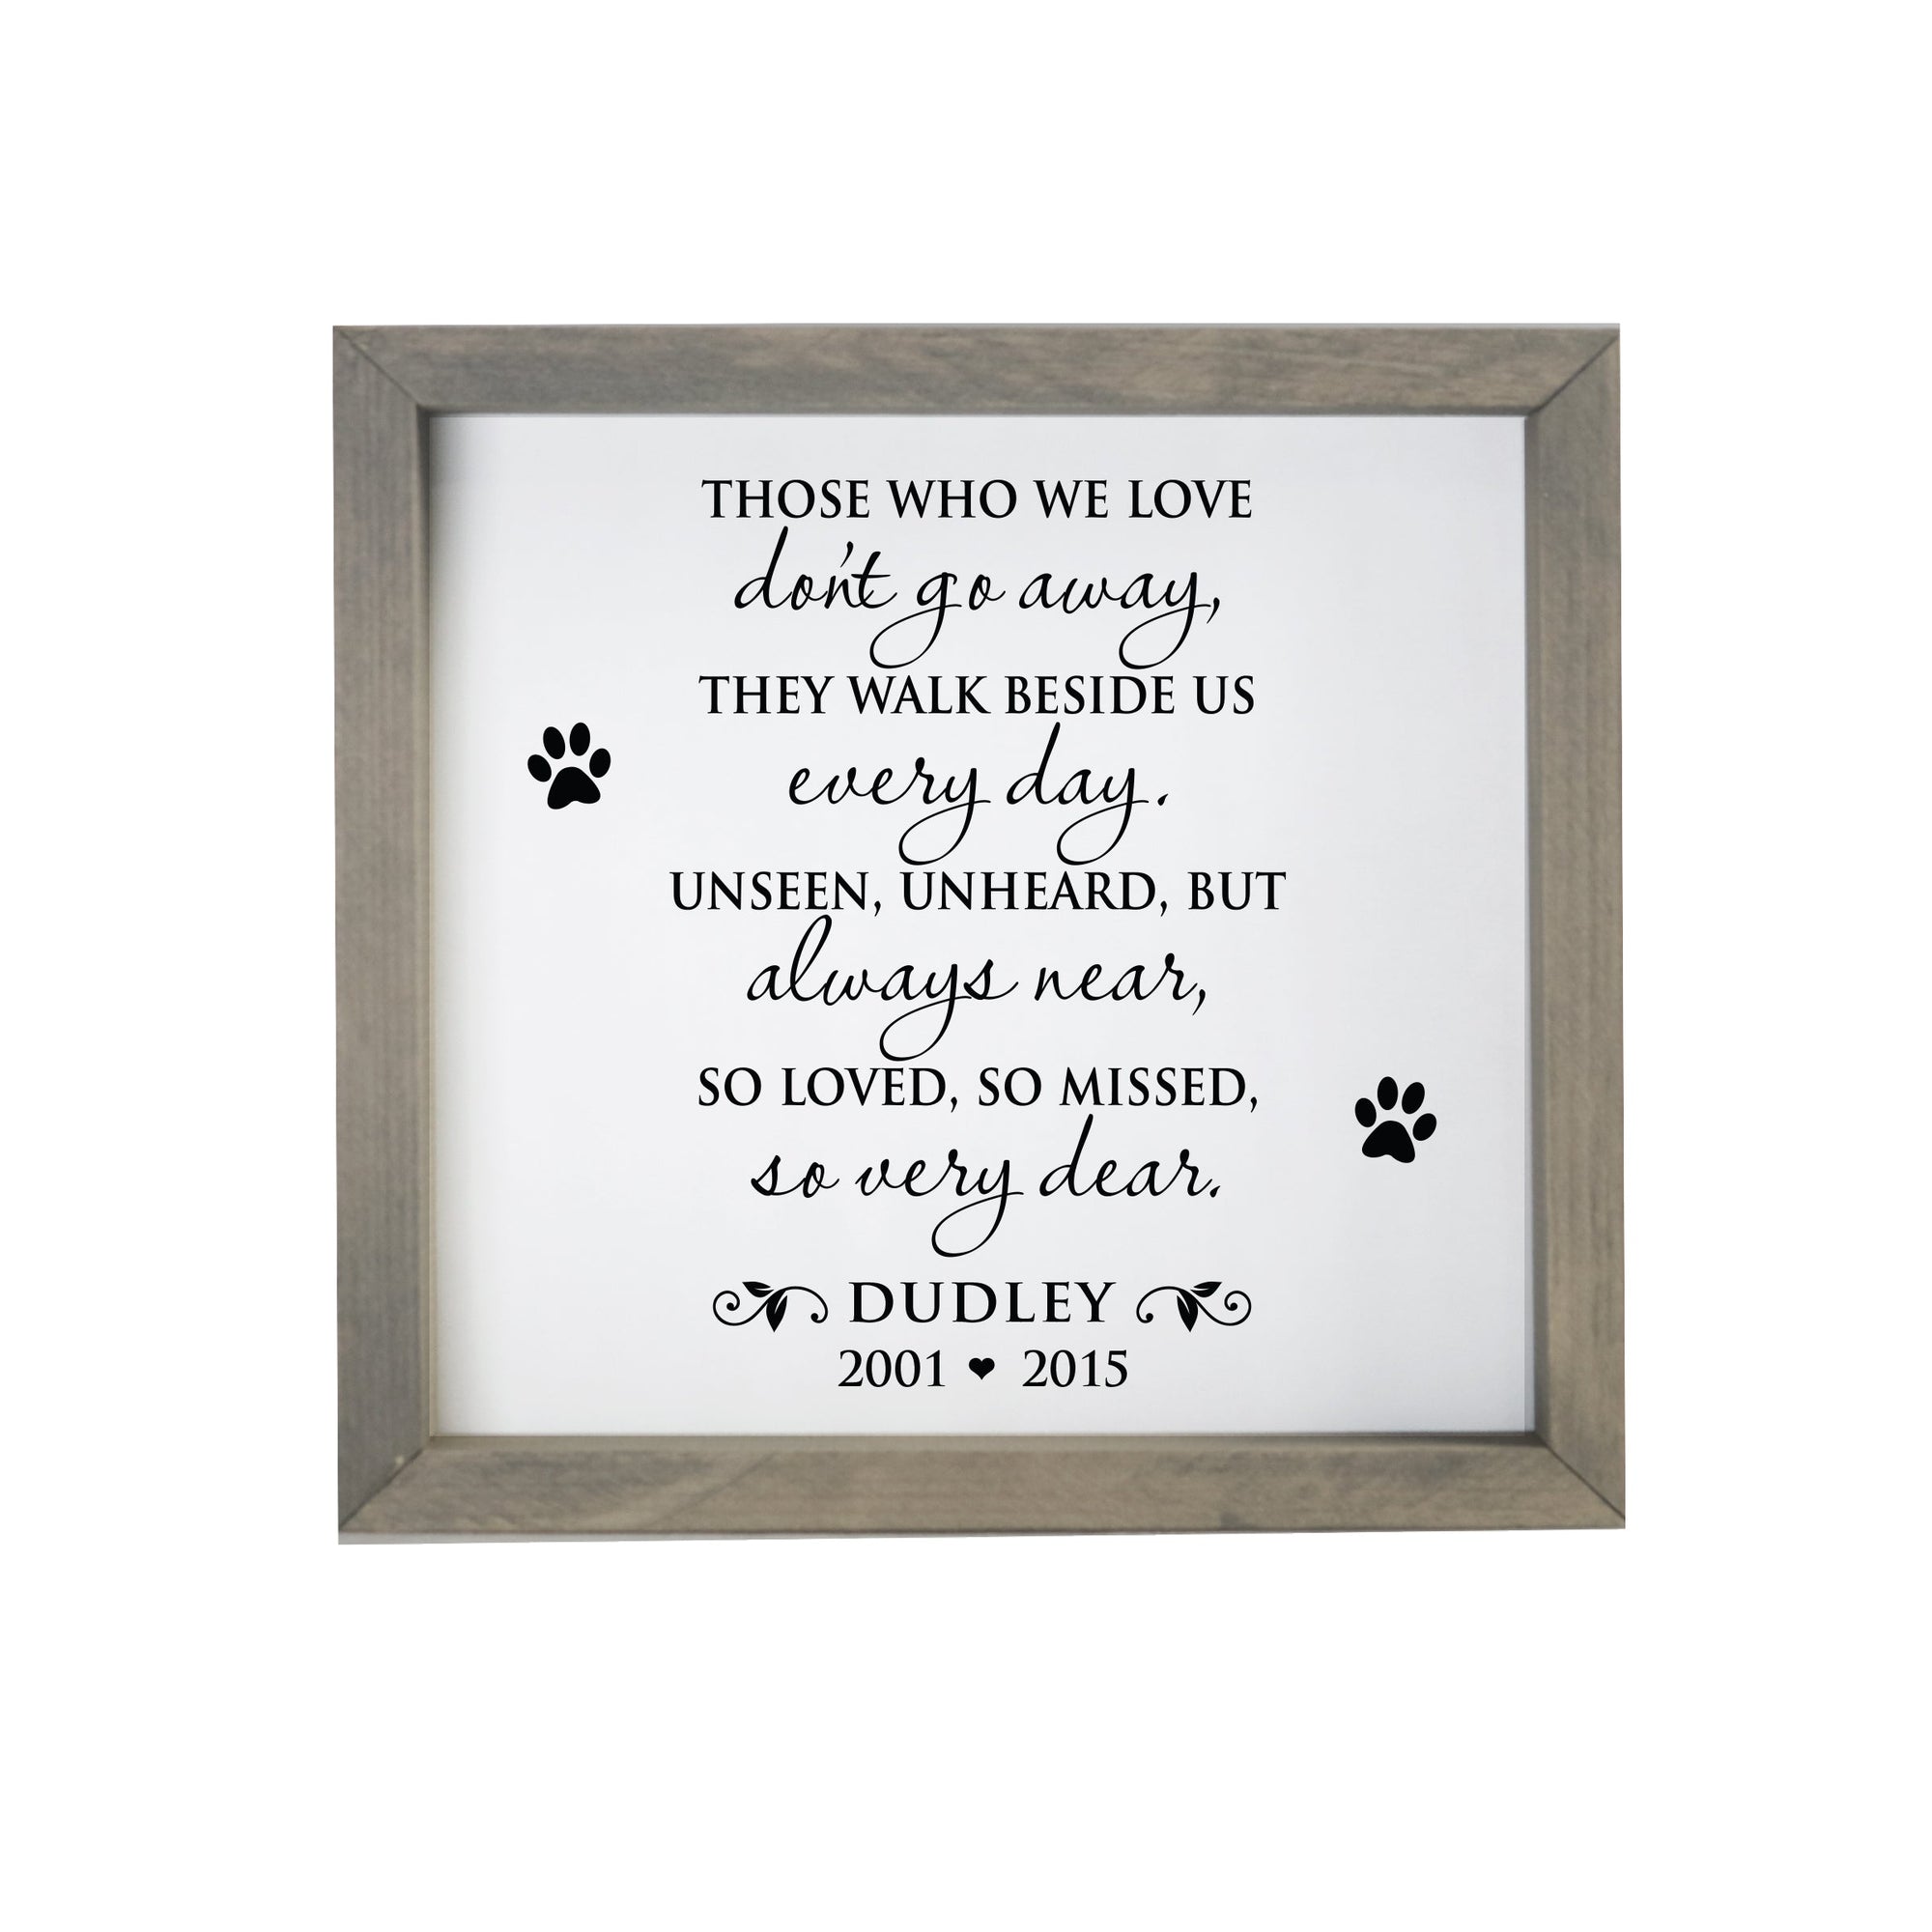 11.5x11.5 Grey Framed Pet Memorial Shadow Box with phrase "Those Who We Love Don't Go Away"